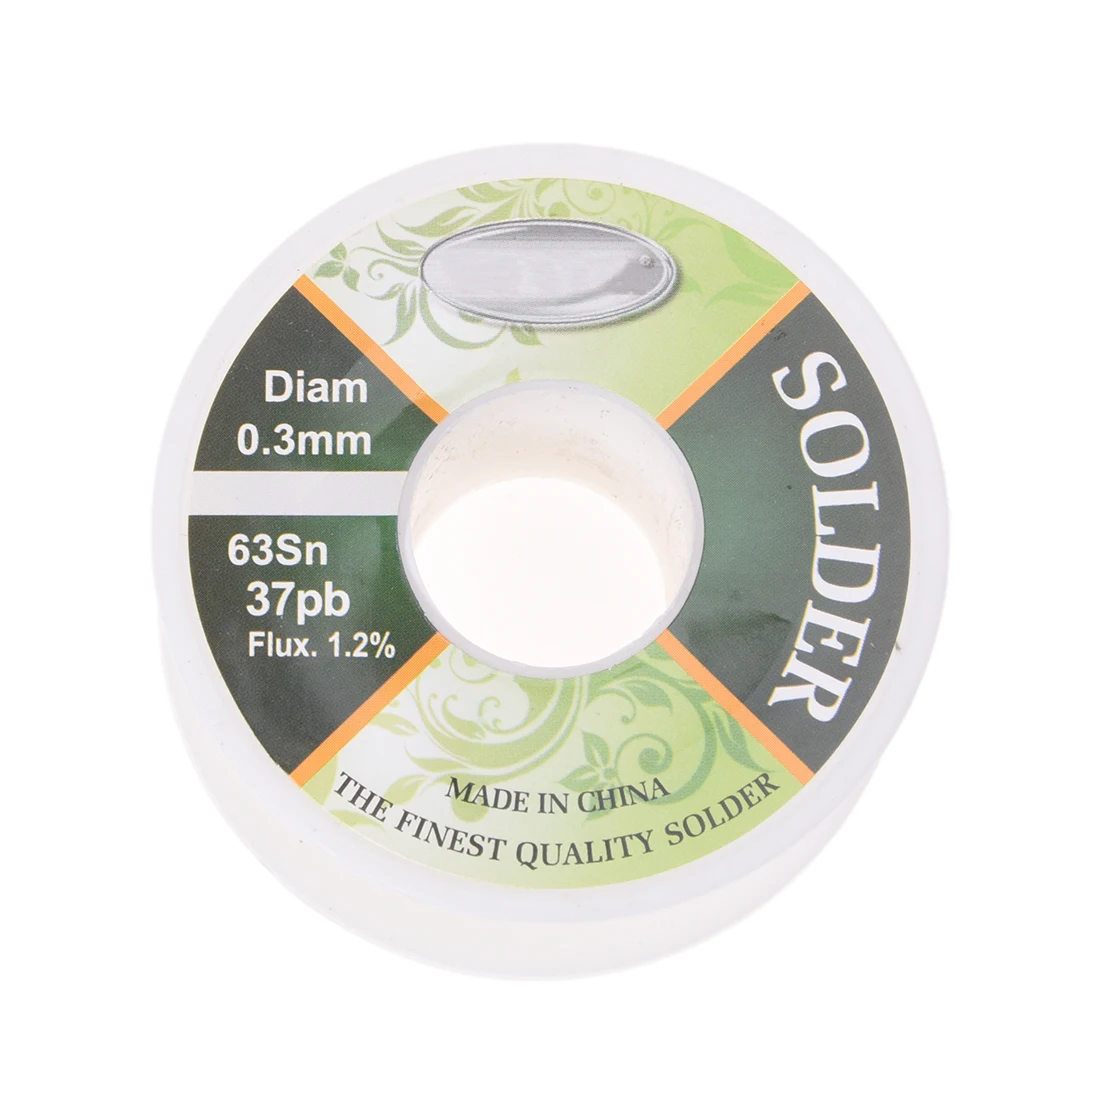 

Brand New The finest quality Solder 0.3mm Dia,1.2% Flux,63Sn/37Pb, Wire Reel